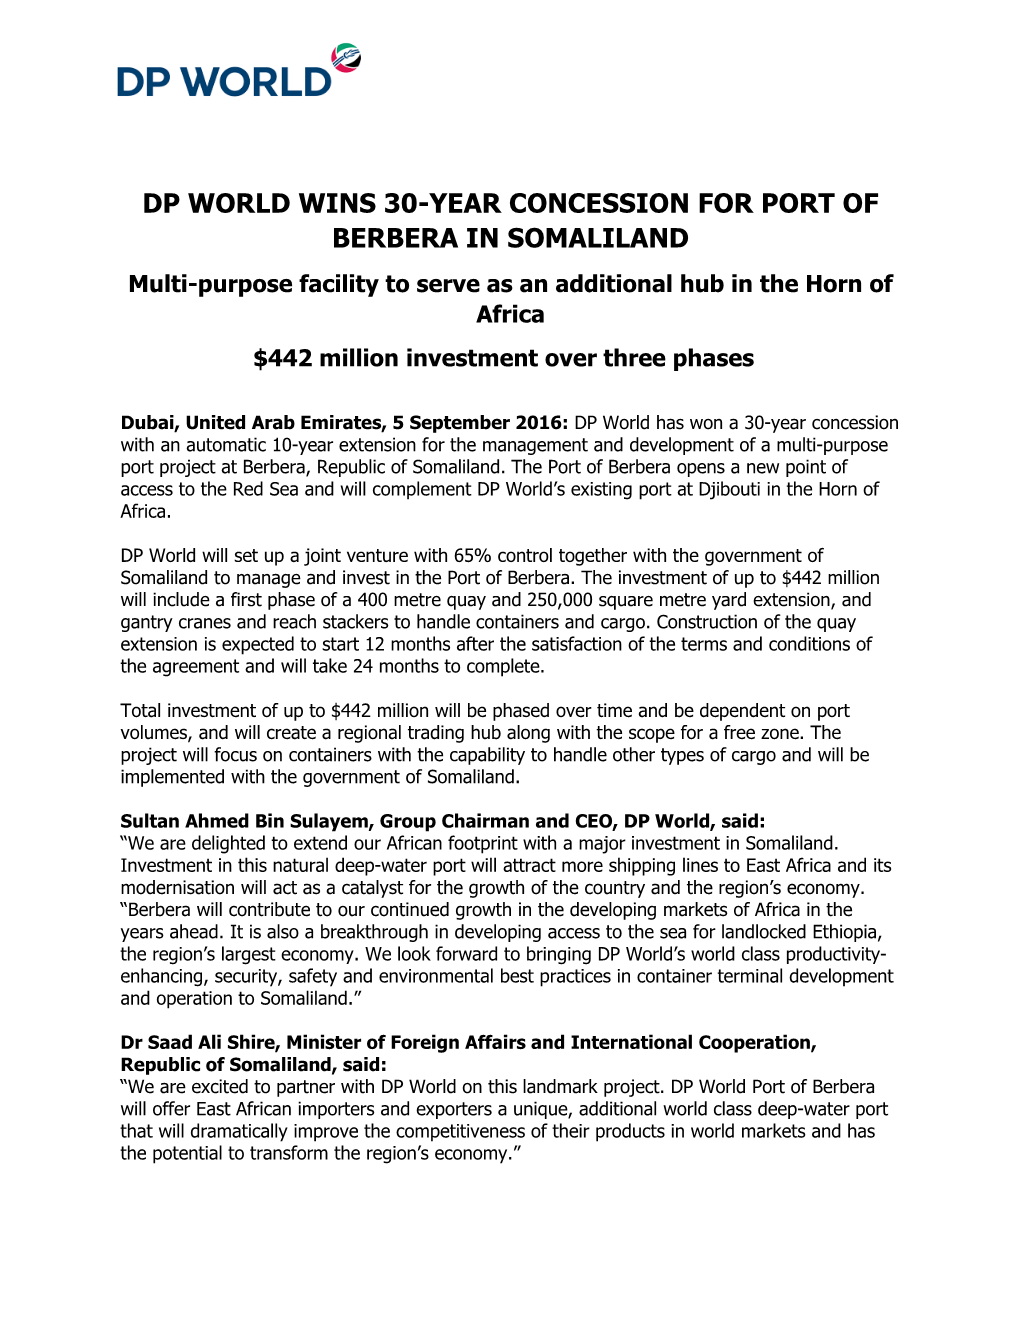 Dp World Wins 30-Year Concession for Port of Berbera in Somaliland